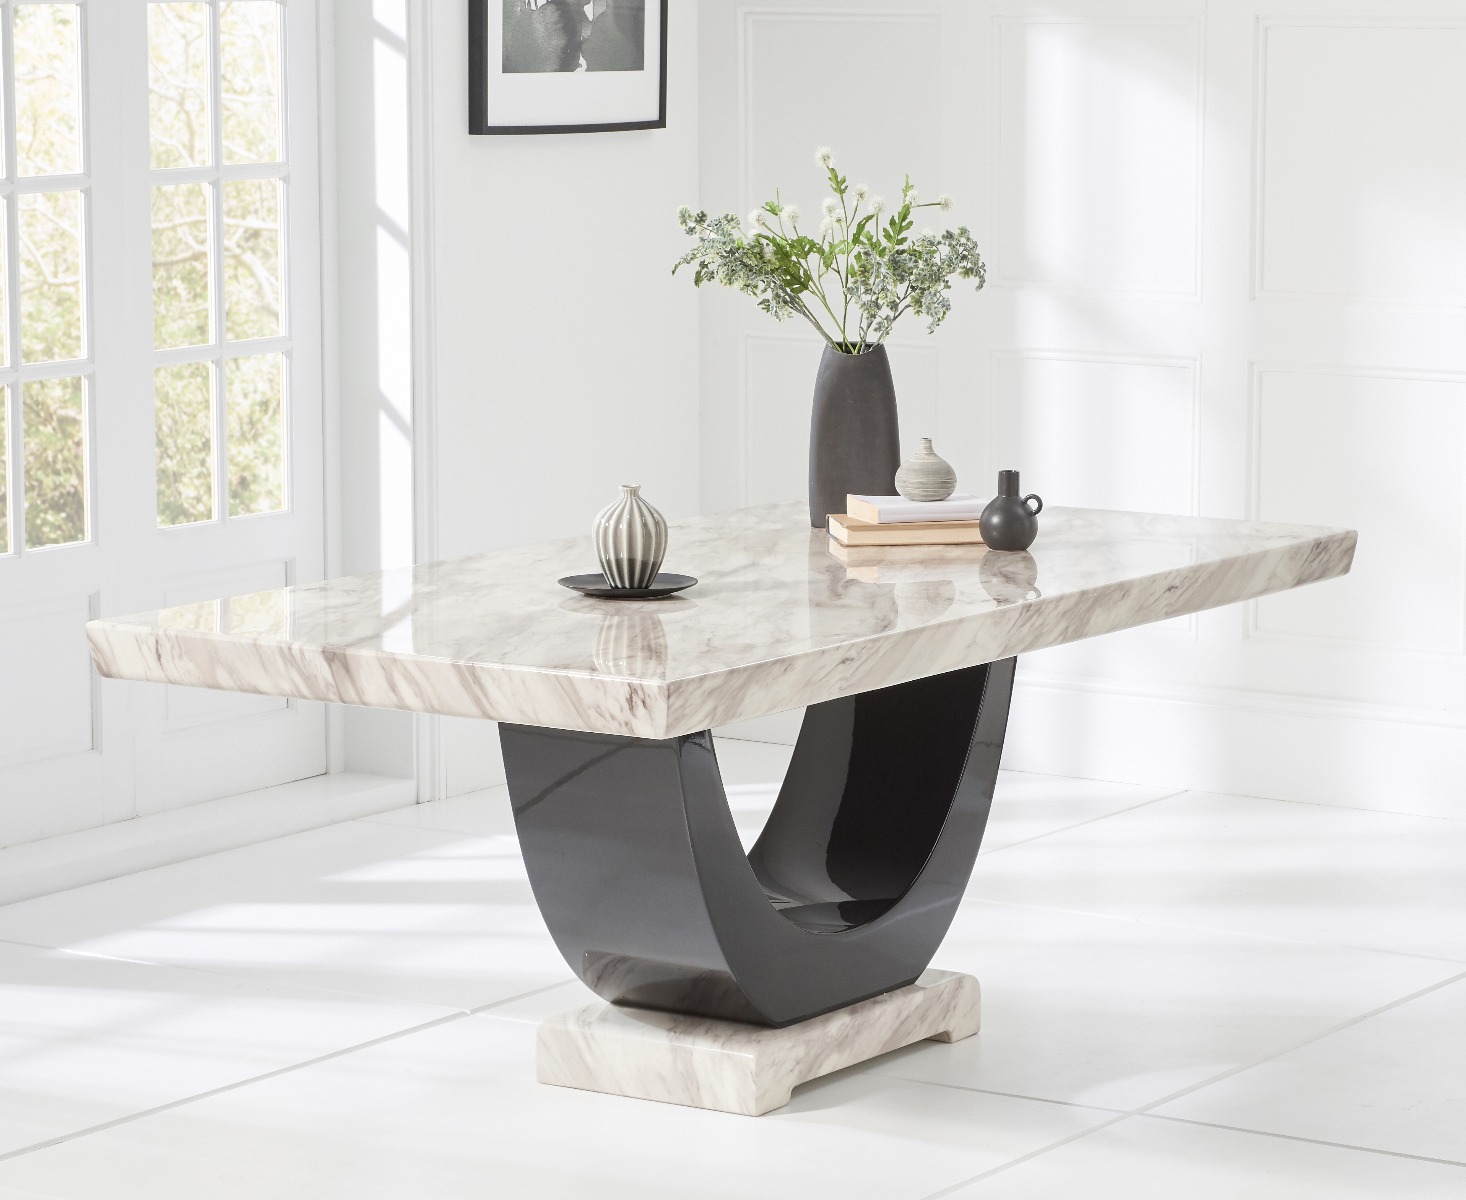 Photo 2 of Raphael 200cm cream and black pedestal marble dining table with 10 grey sophia chairs